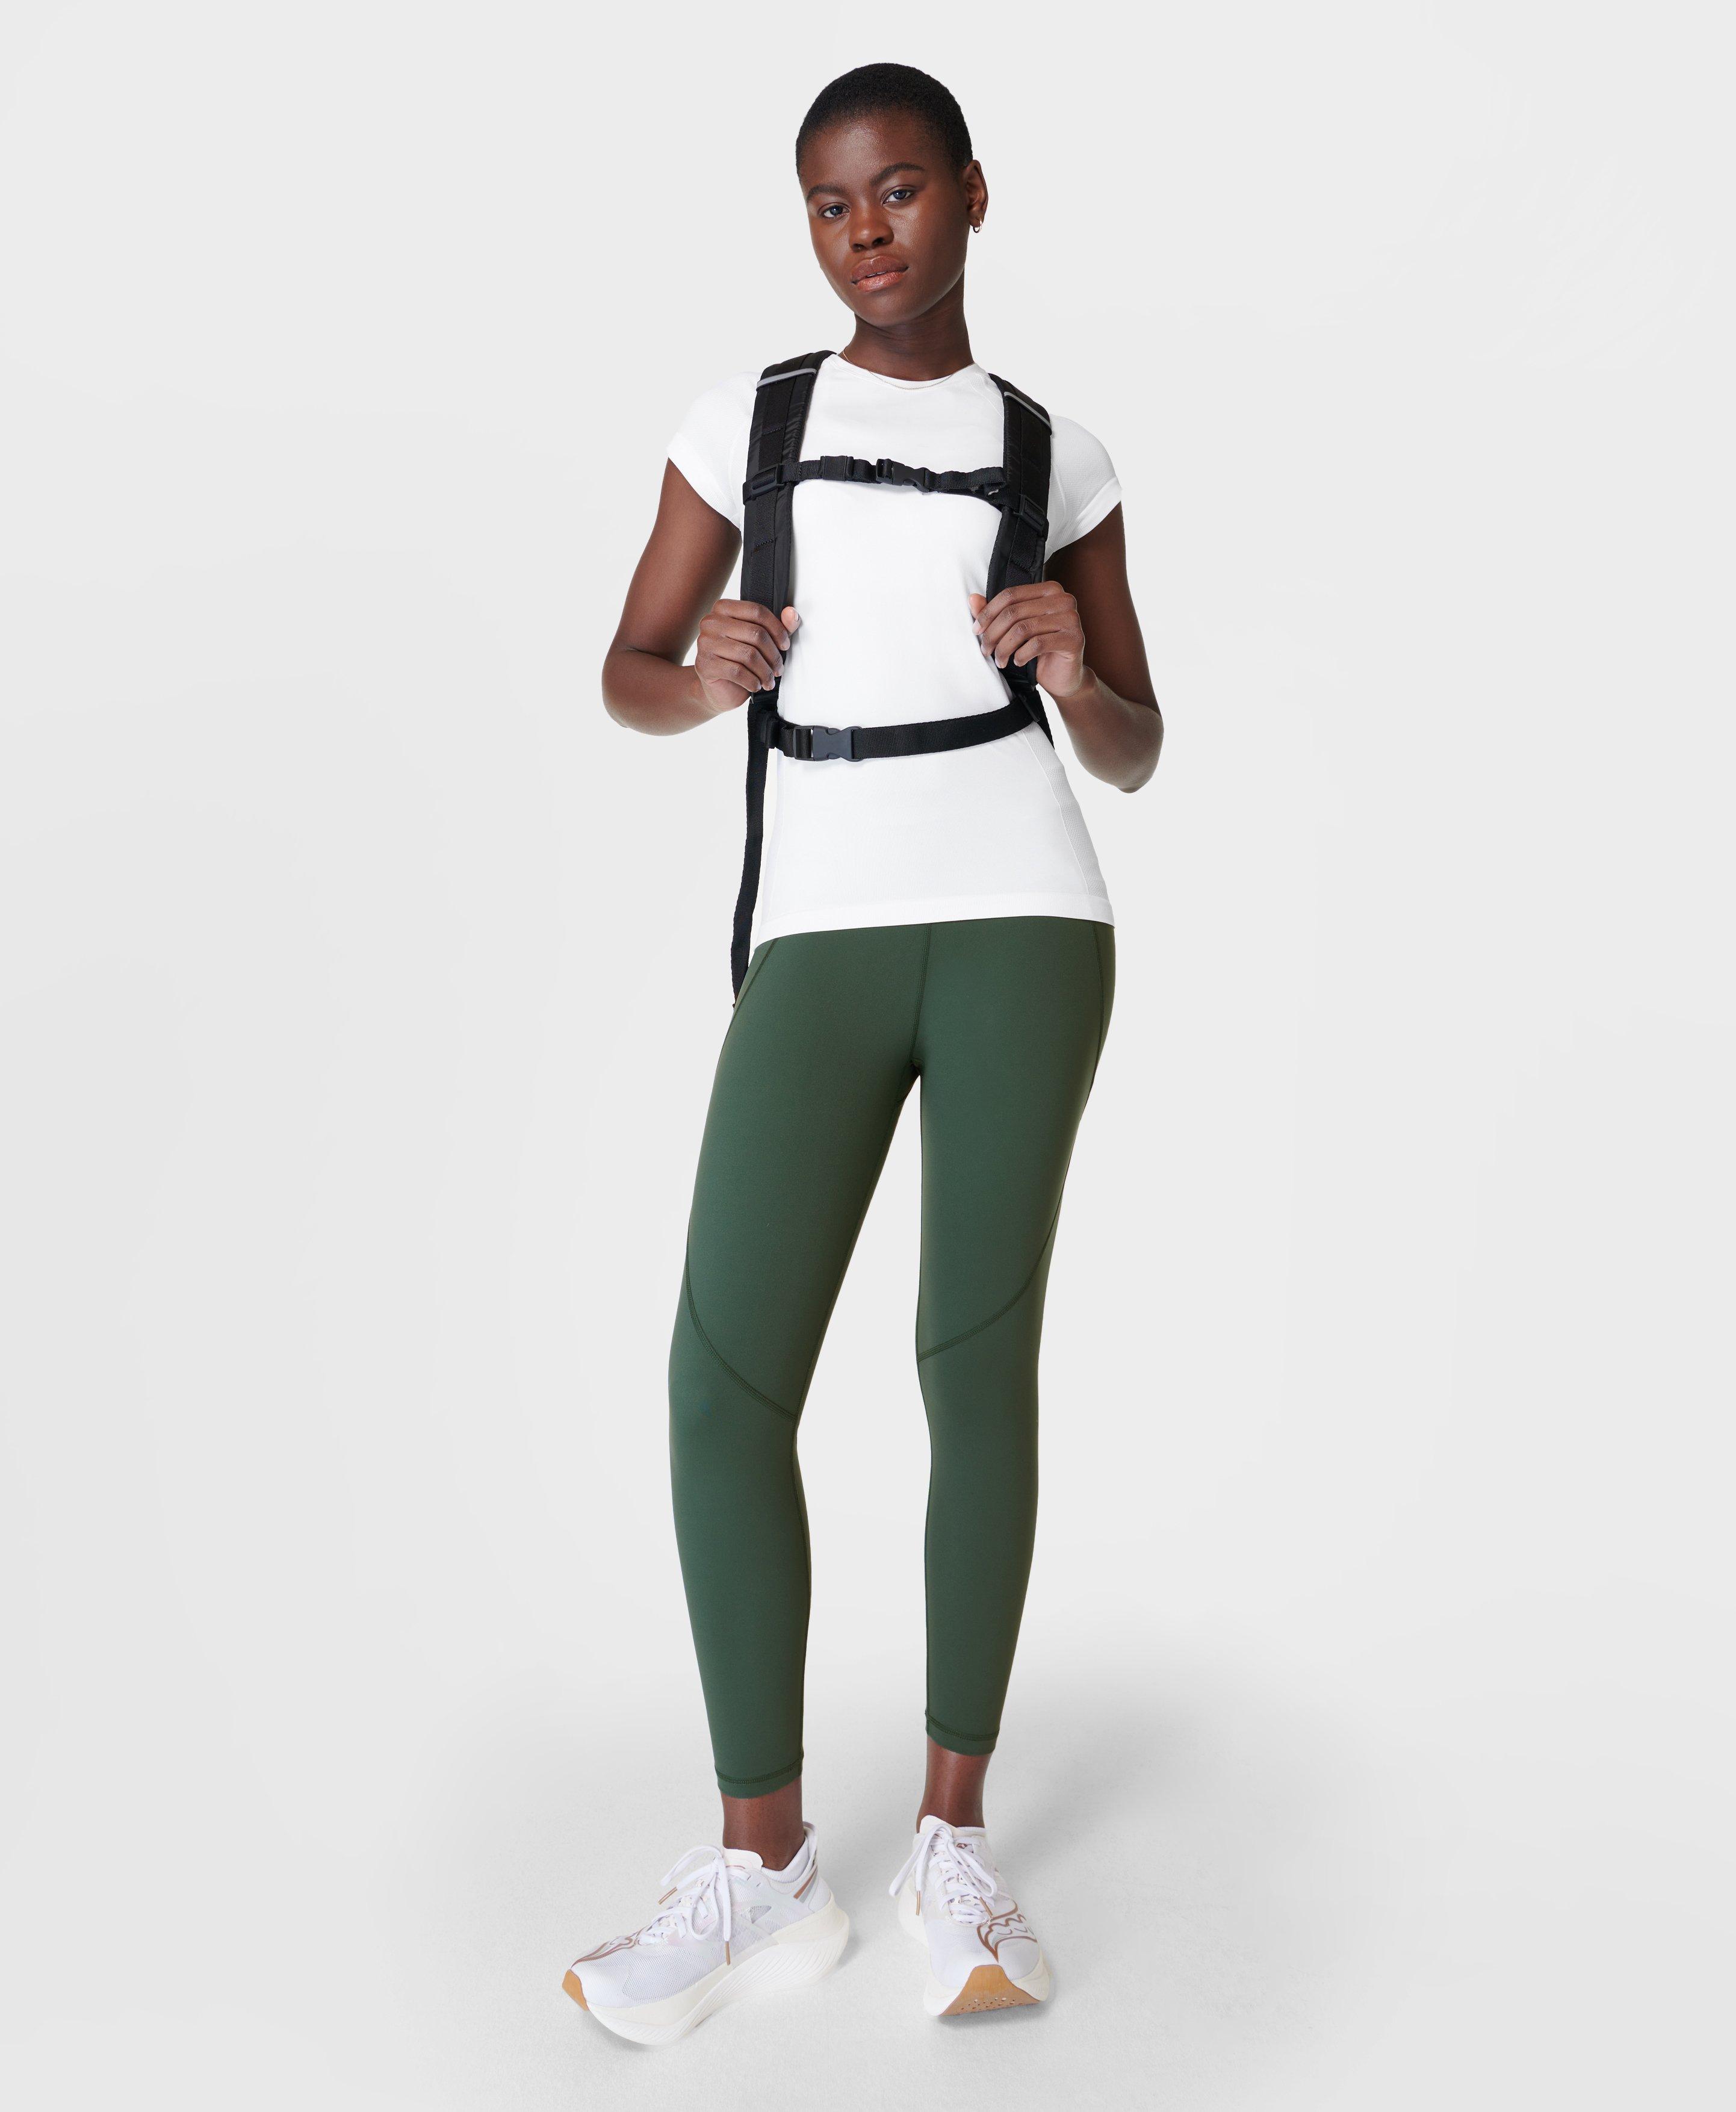 Buy Sweaty Betty Power 7/8 Workout Legging In Camo - Green At 37% Off